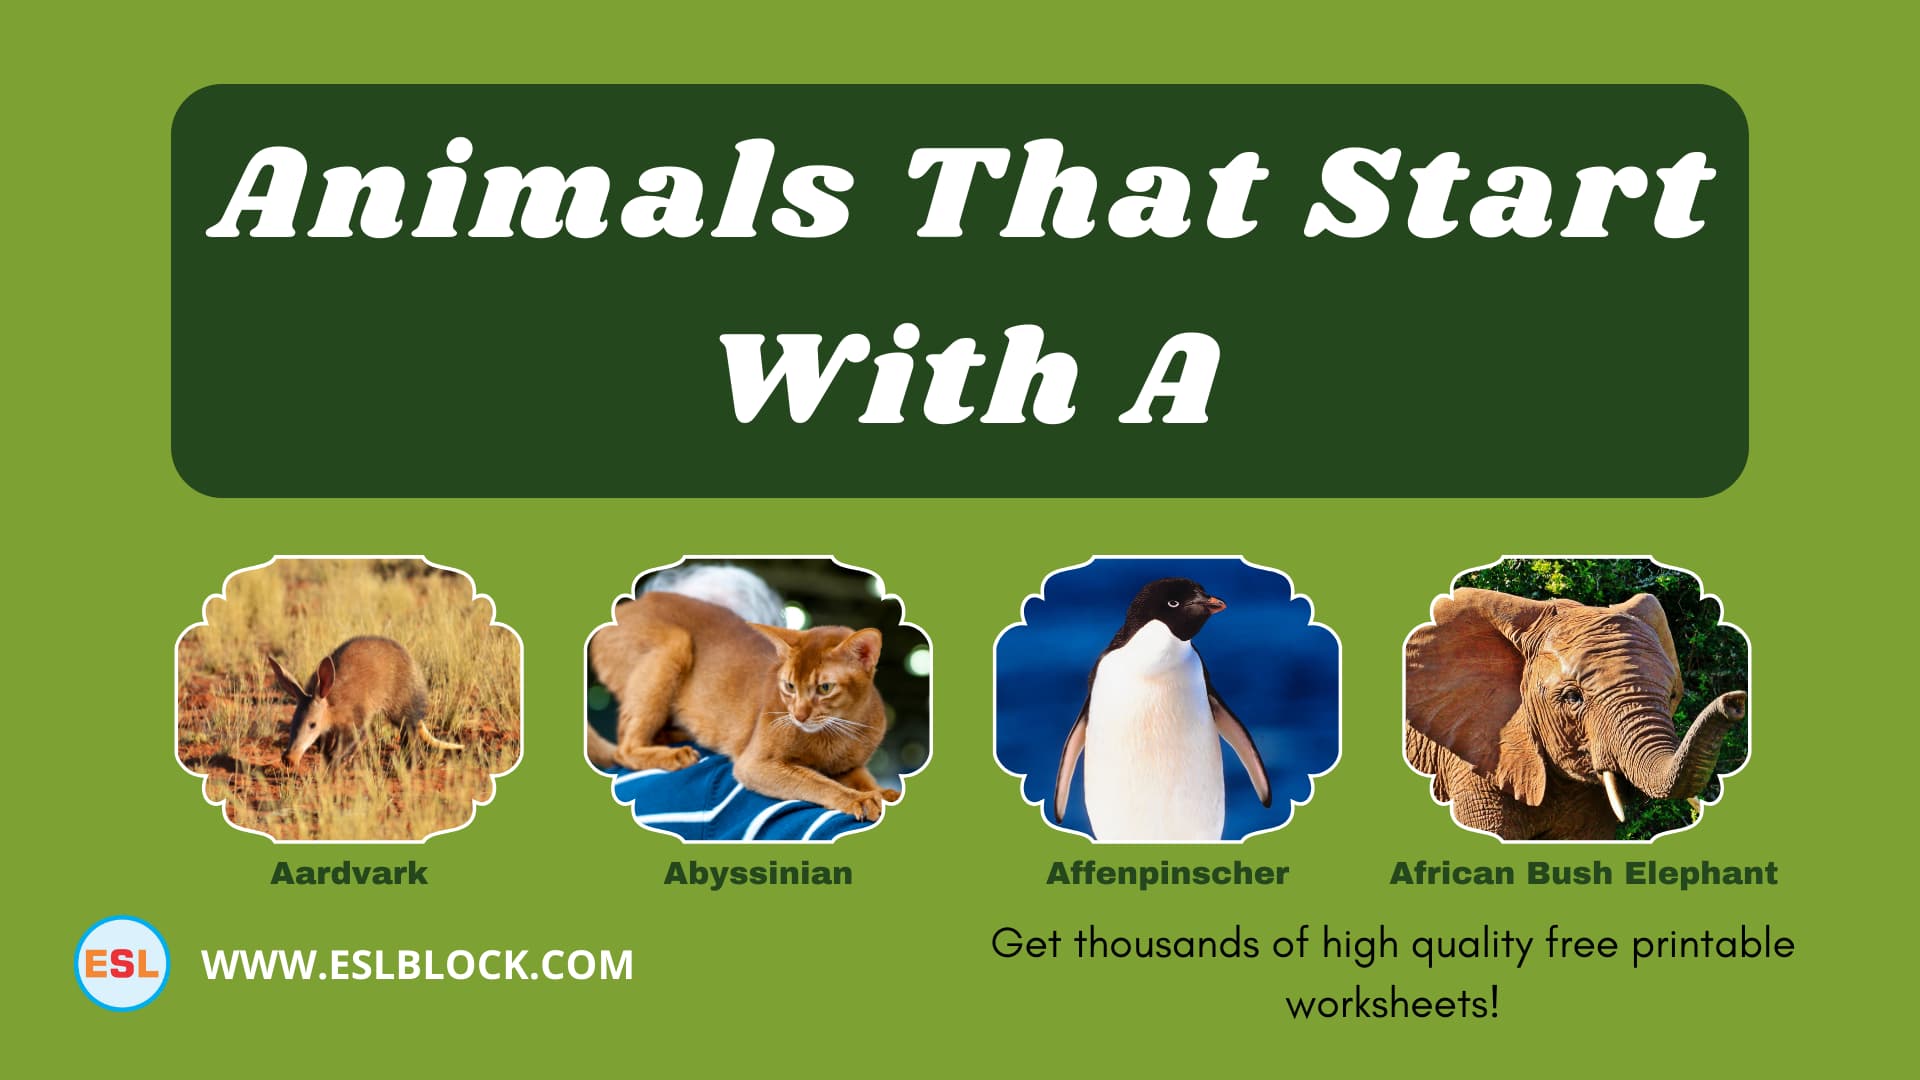 5 Letter Animals Starting With A, A Animals, A Animals in English, A Animals Names, Animals List, Animals Names, Animals That Begins With A, Animals That Start With A, English, English Nouns, English Vocabulary, English Words, List of Animals That Start With A, Nouns, Vocabulary